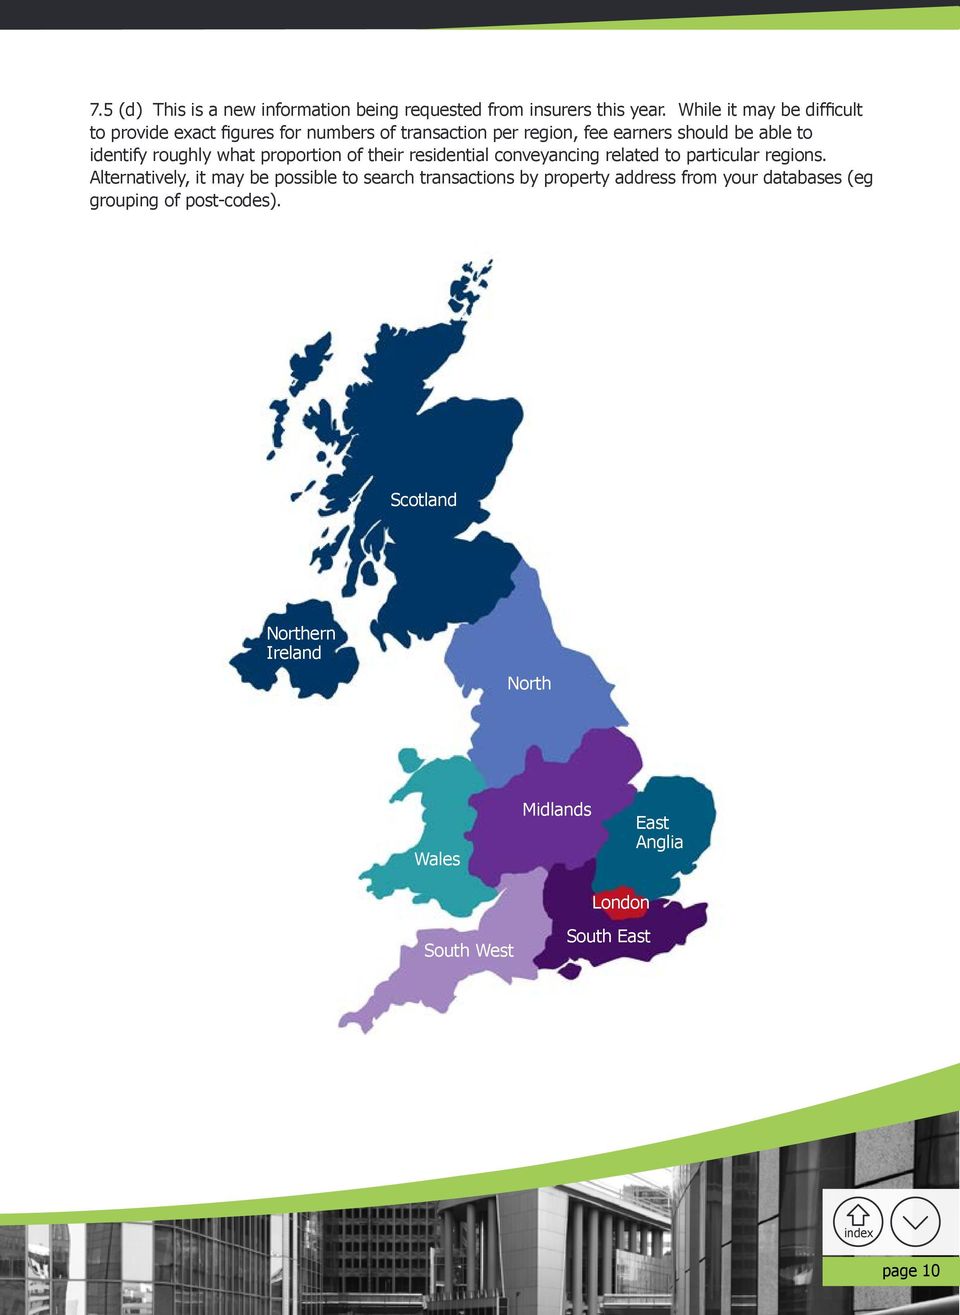 roughly what proportion of their residential conveyancing related to particular regions.